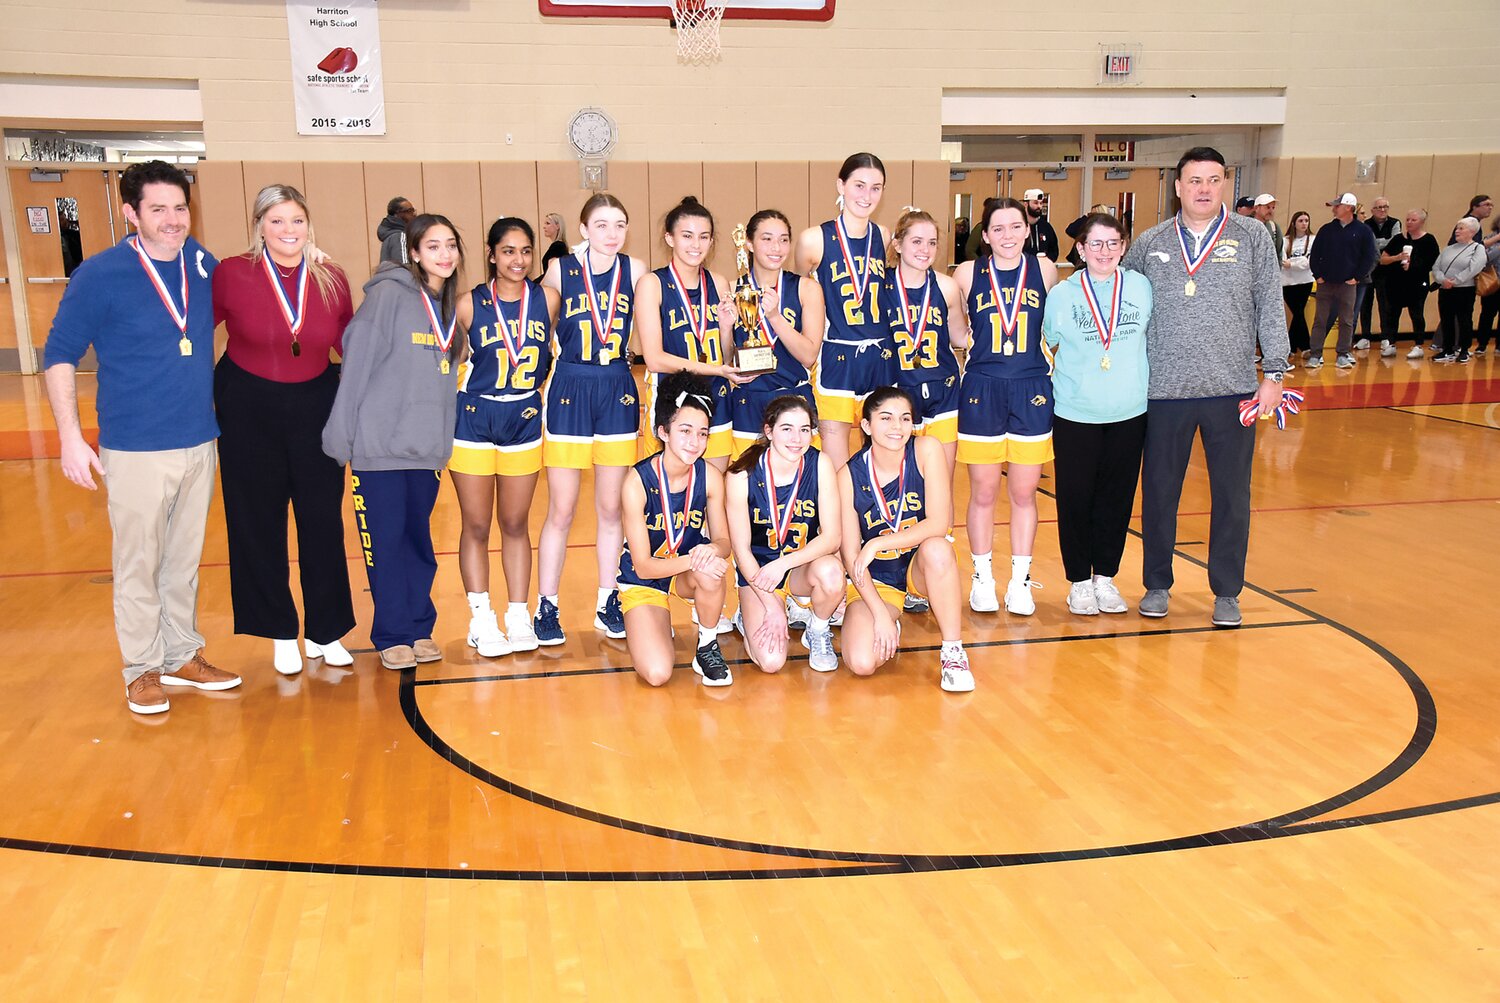 The New Hope-Solebury girls basketball team defeated Renaissance Academy Charter School 49-27 for the District One Class 3A title Saturday.